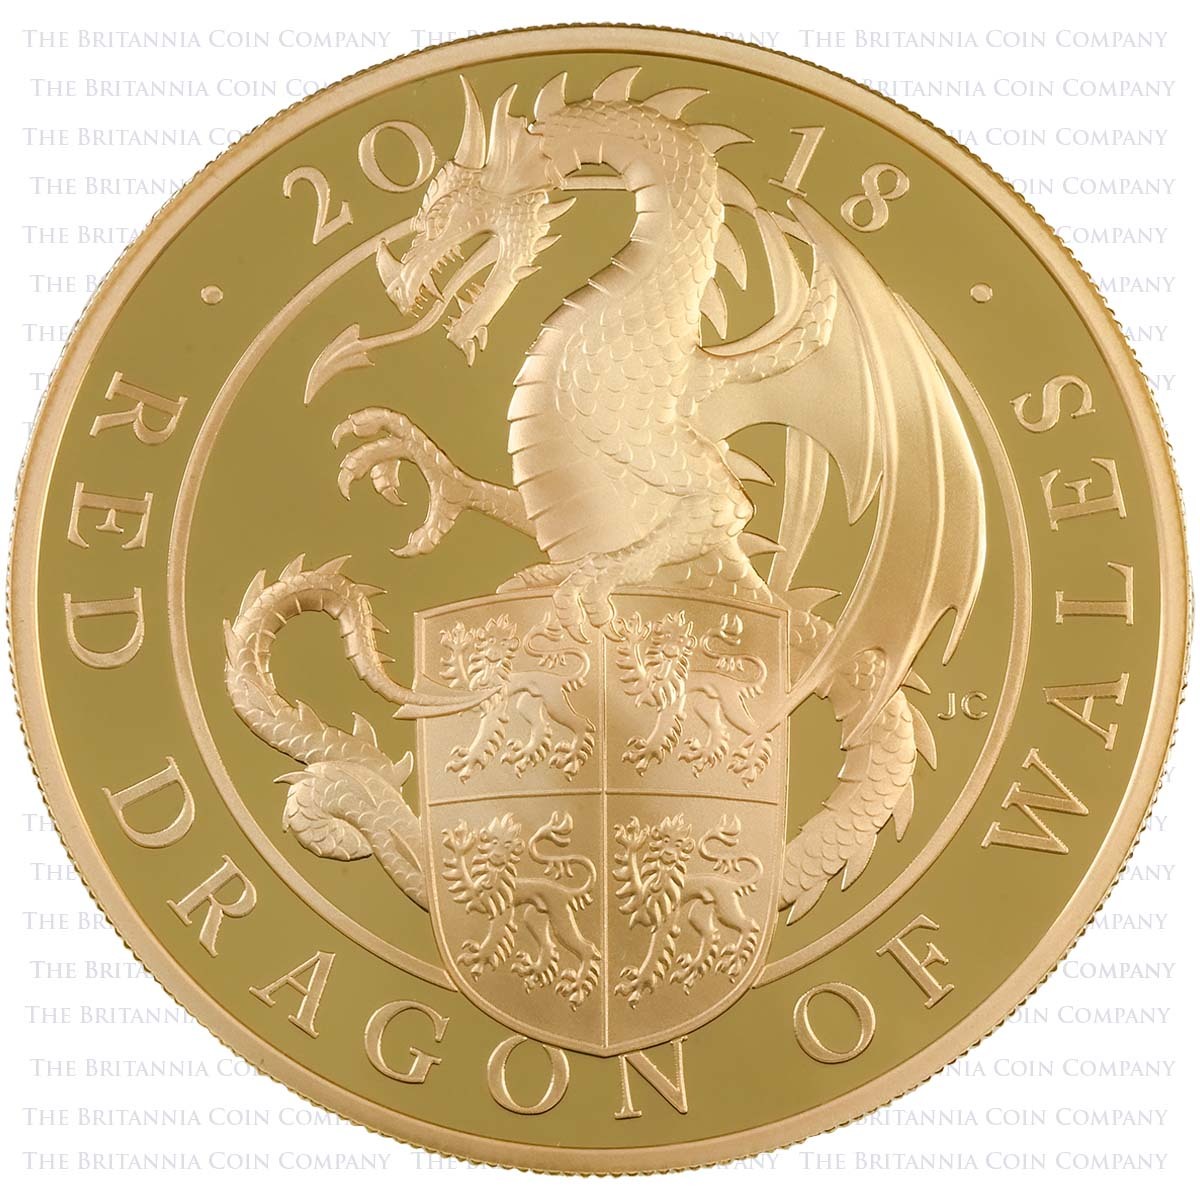 UK18QDG5 2018 Queen's Beasts Red Dragon Of Wales 5oz Gold Proof Coin Reverse